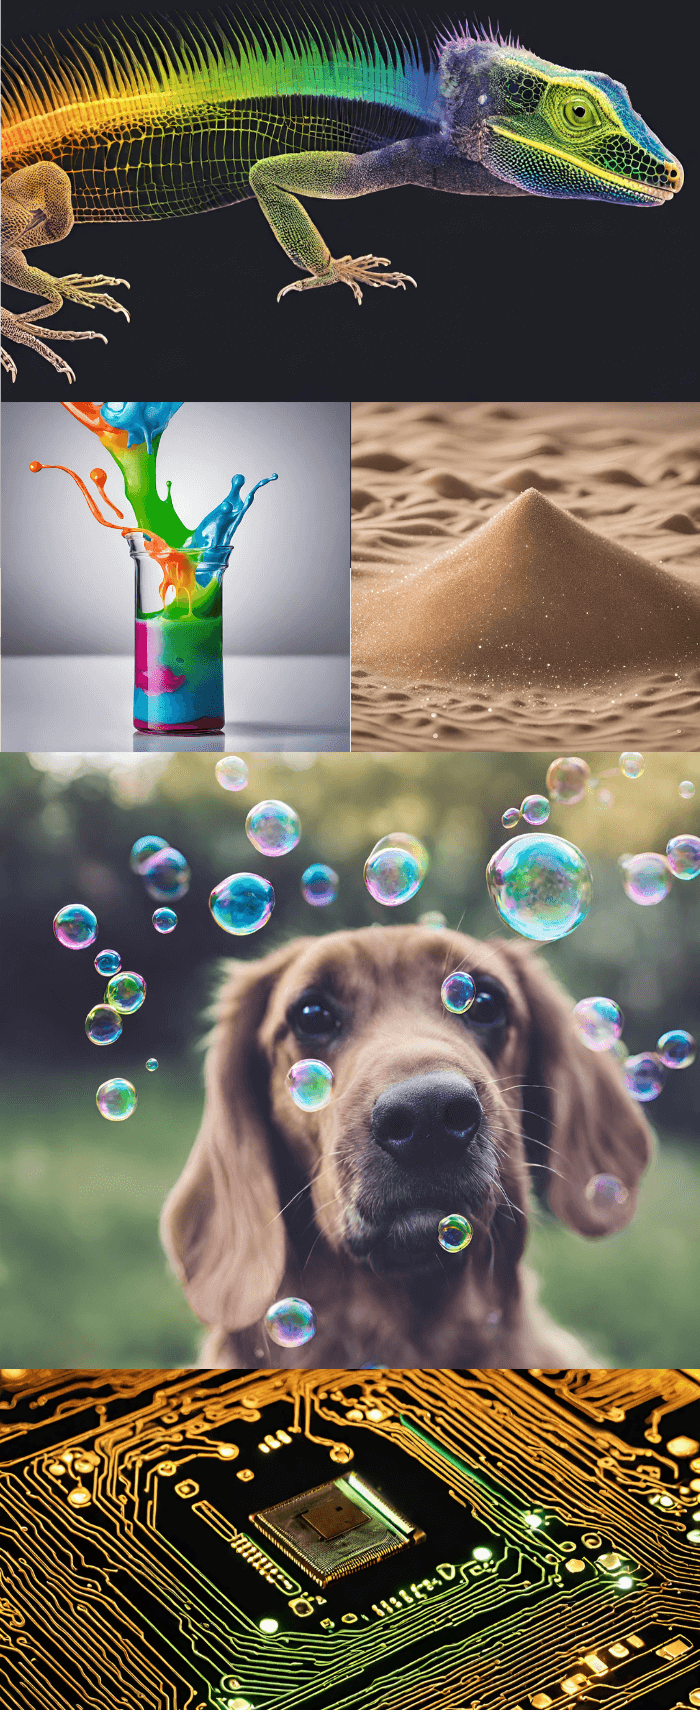 Collage of AI generated images featuring a spectrum-colored lizard rendering, a beaker being filled with multi-colored slime, sand, a dog surrounded by soap bubbles floating in the air, and a gold-colored computer circuit board.